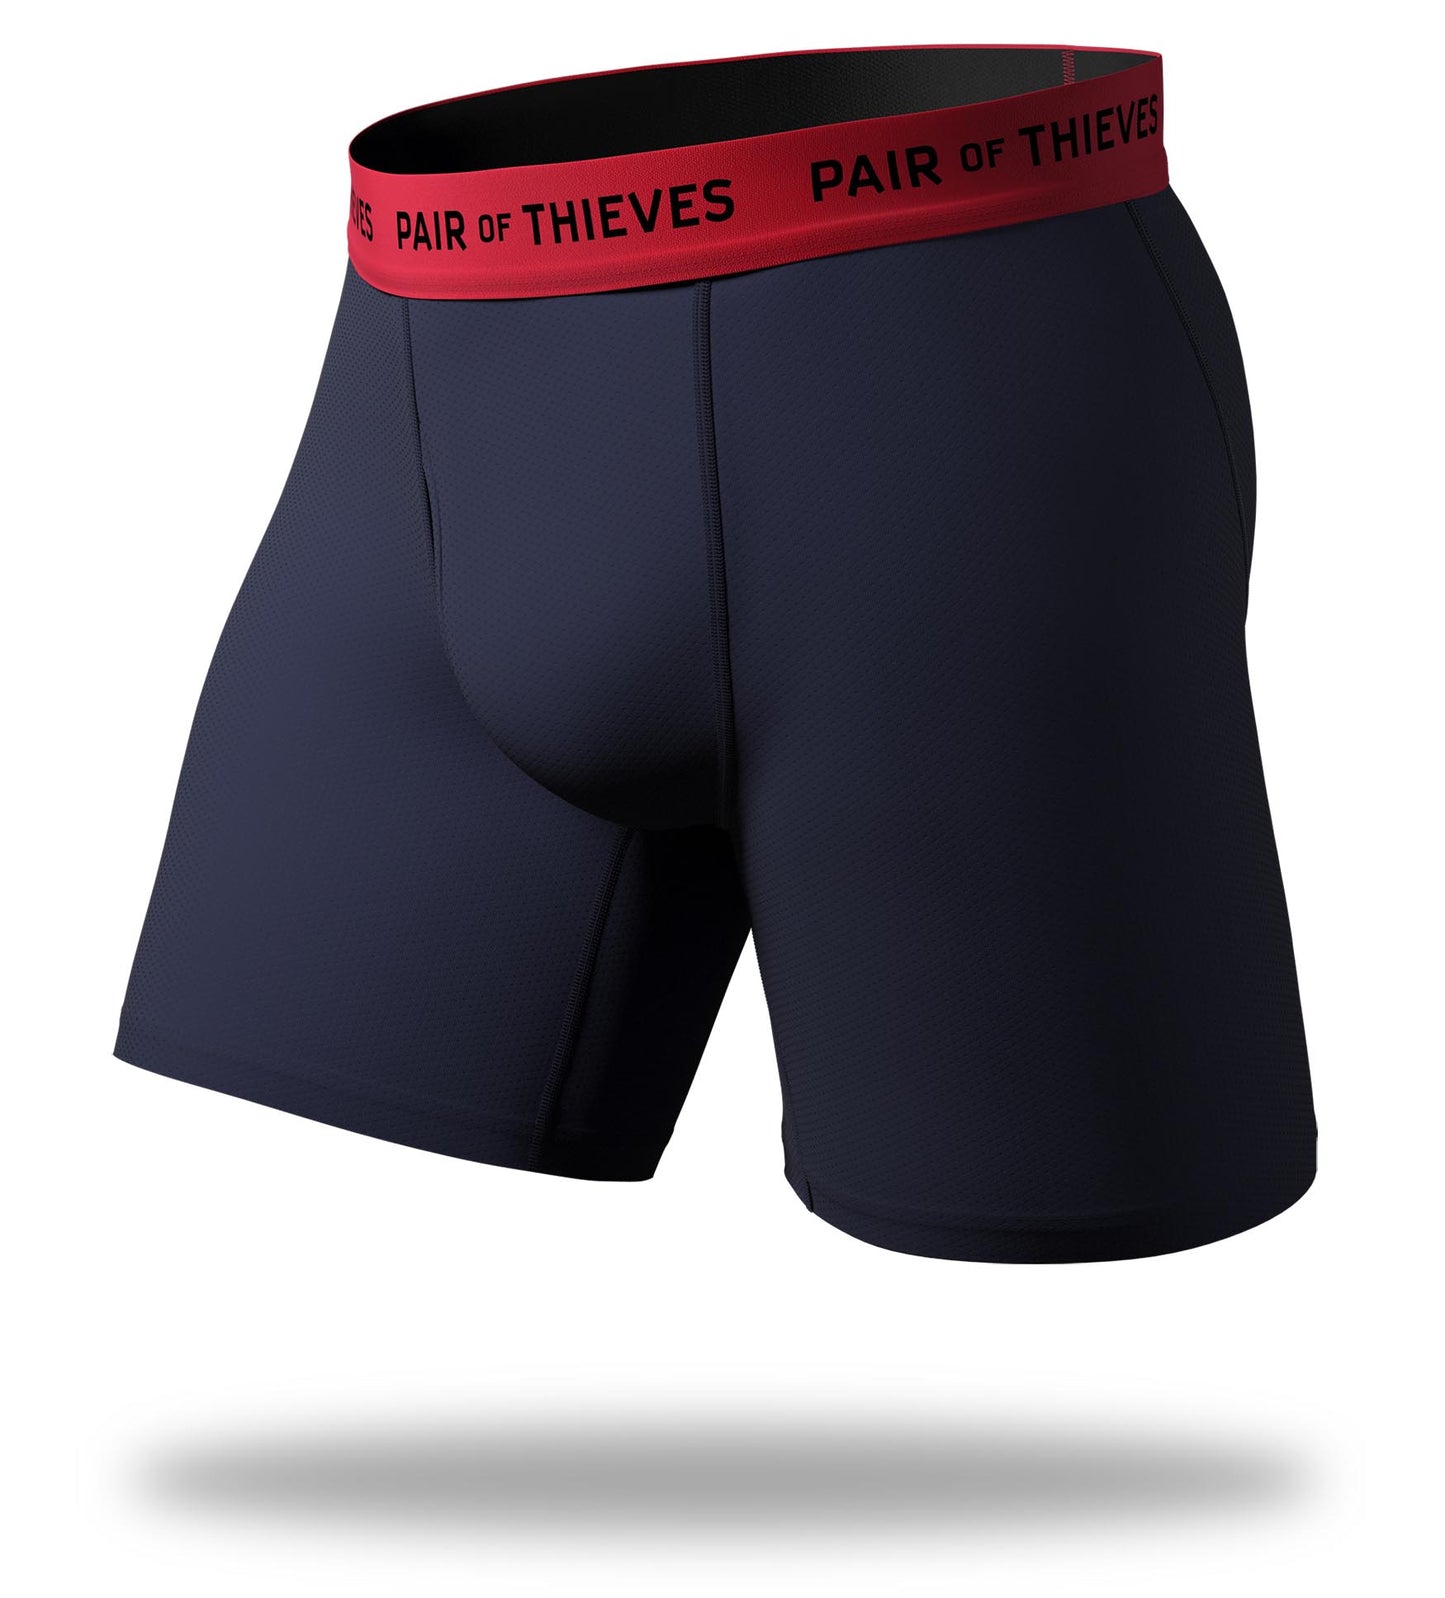 superfit blue long boxer brief, navy with black logo on red waistband